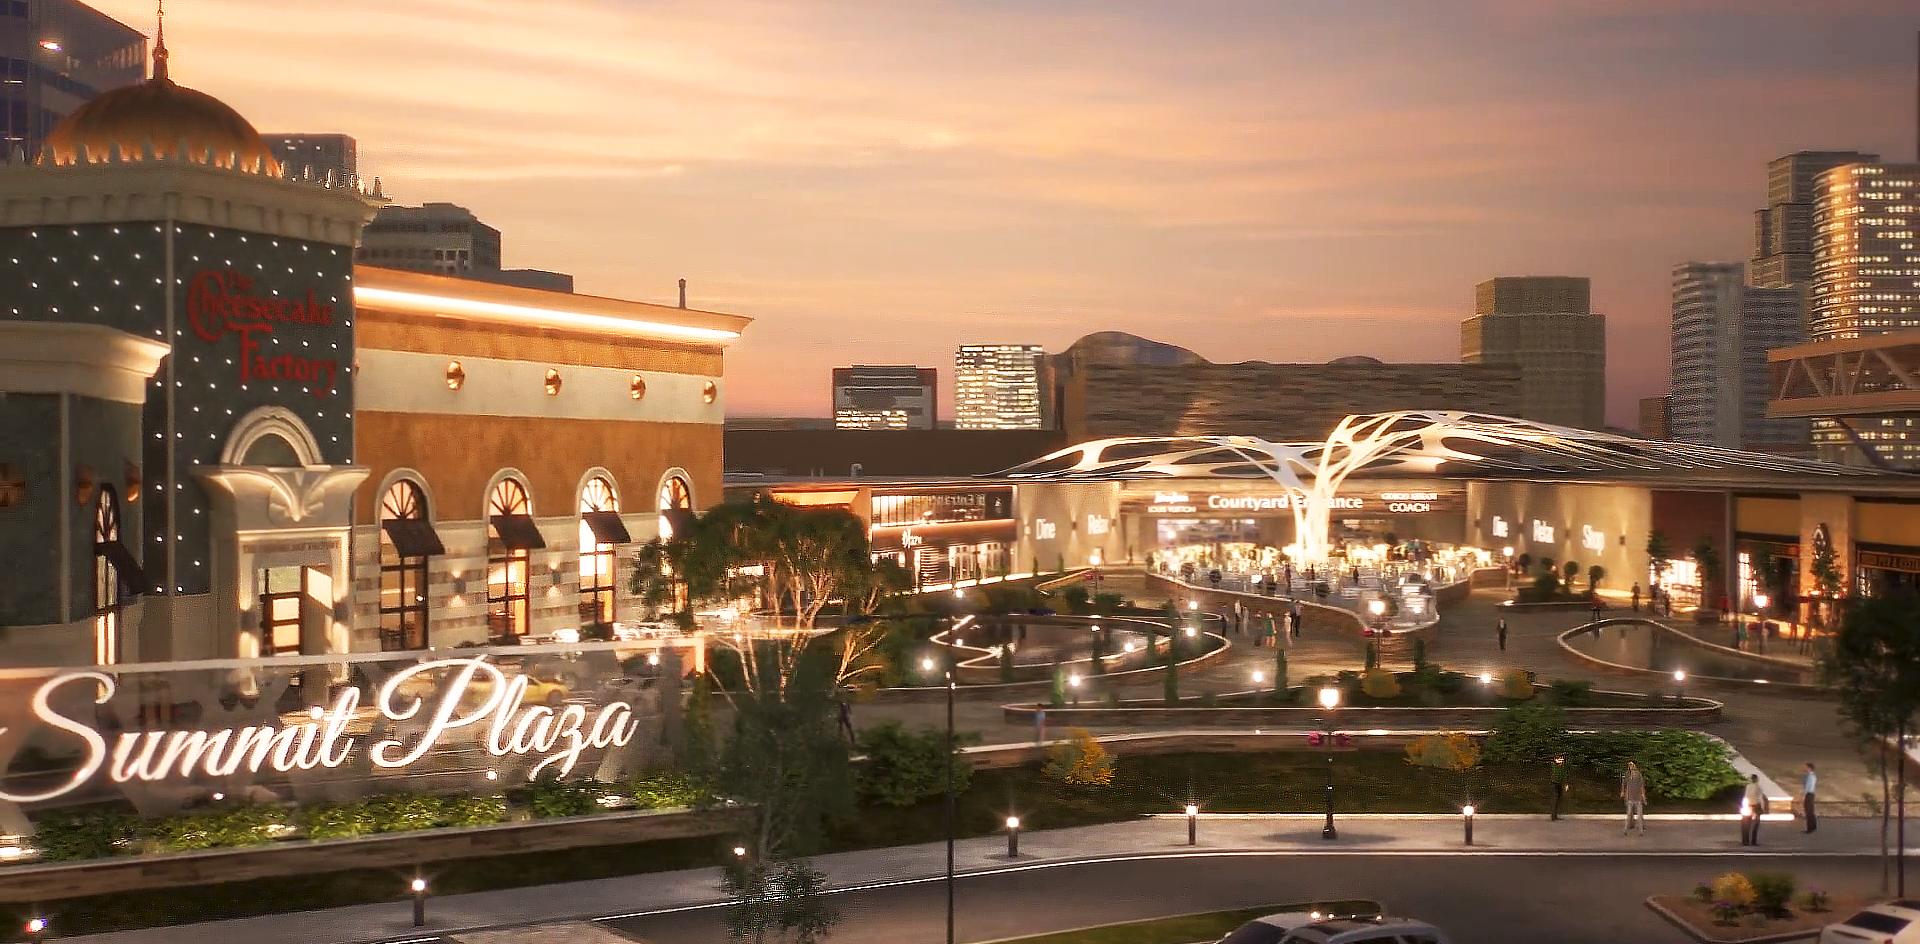 This is a 3D rendered image from Trinity's real estate renderings exhibiting the Summit Plaza Mall. This image overlooks a section of the mall - with a close to a ground view during an beautiful orange evening sunset. It displays several stores and restaurants. To the left of the screen in front of the restaurants is a light up sign that reads "Summit Plaza". 